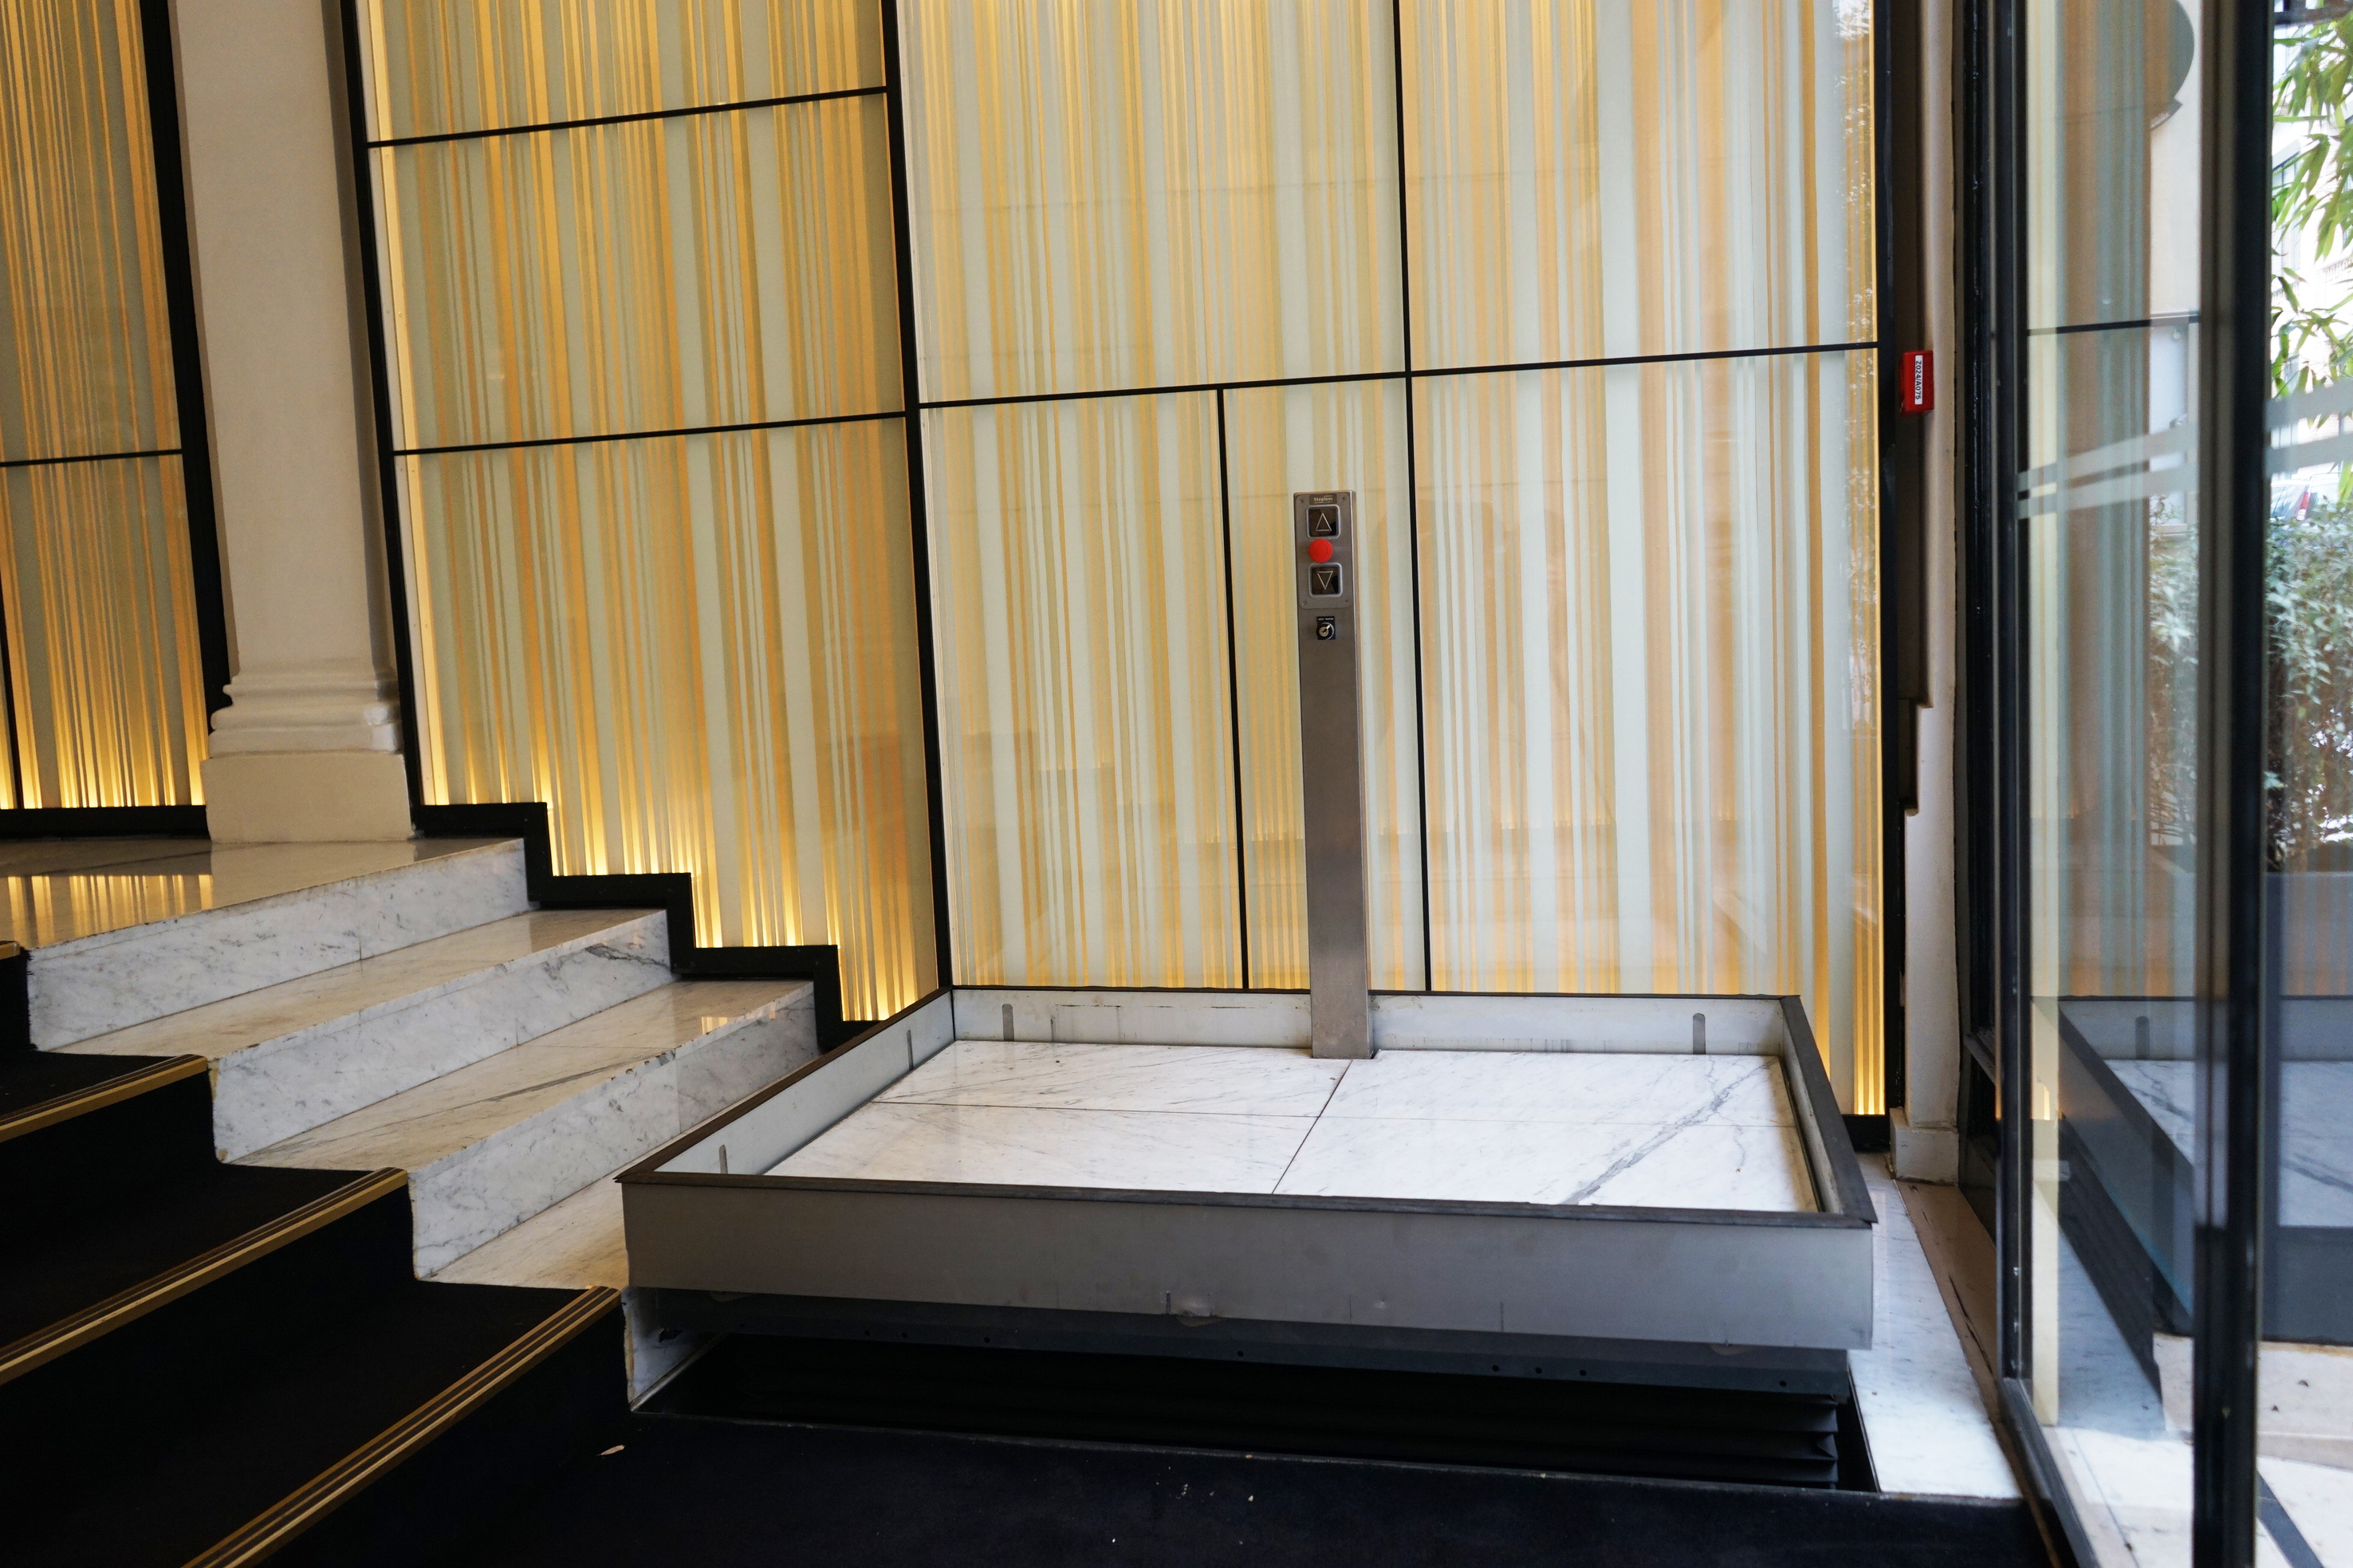 Hidden Disabled Access Lift in Hotel Lobby